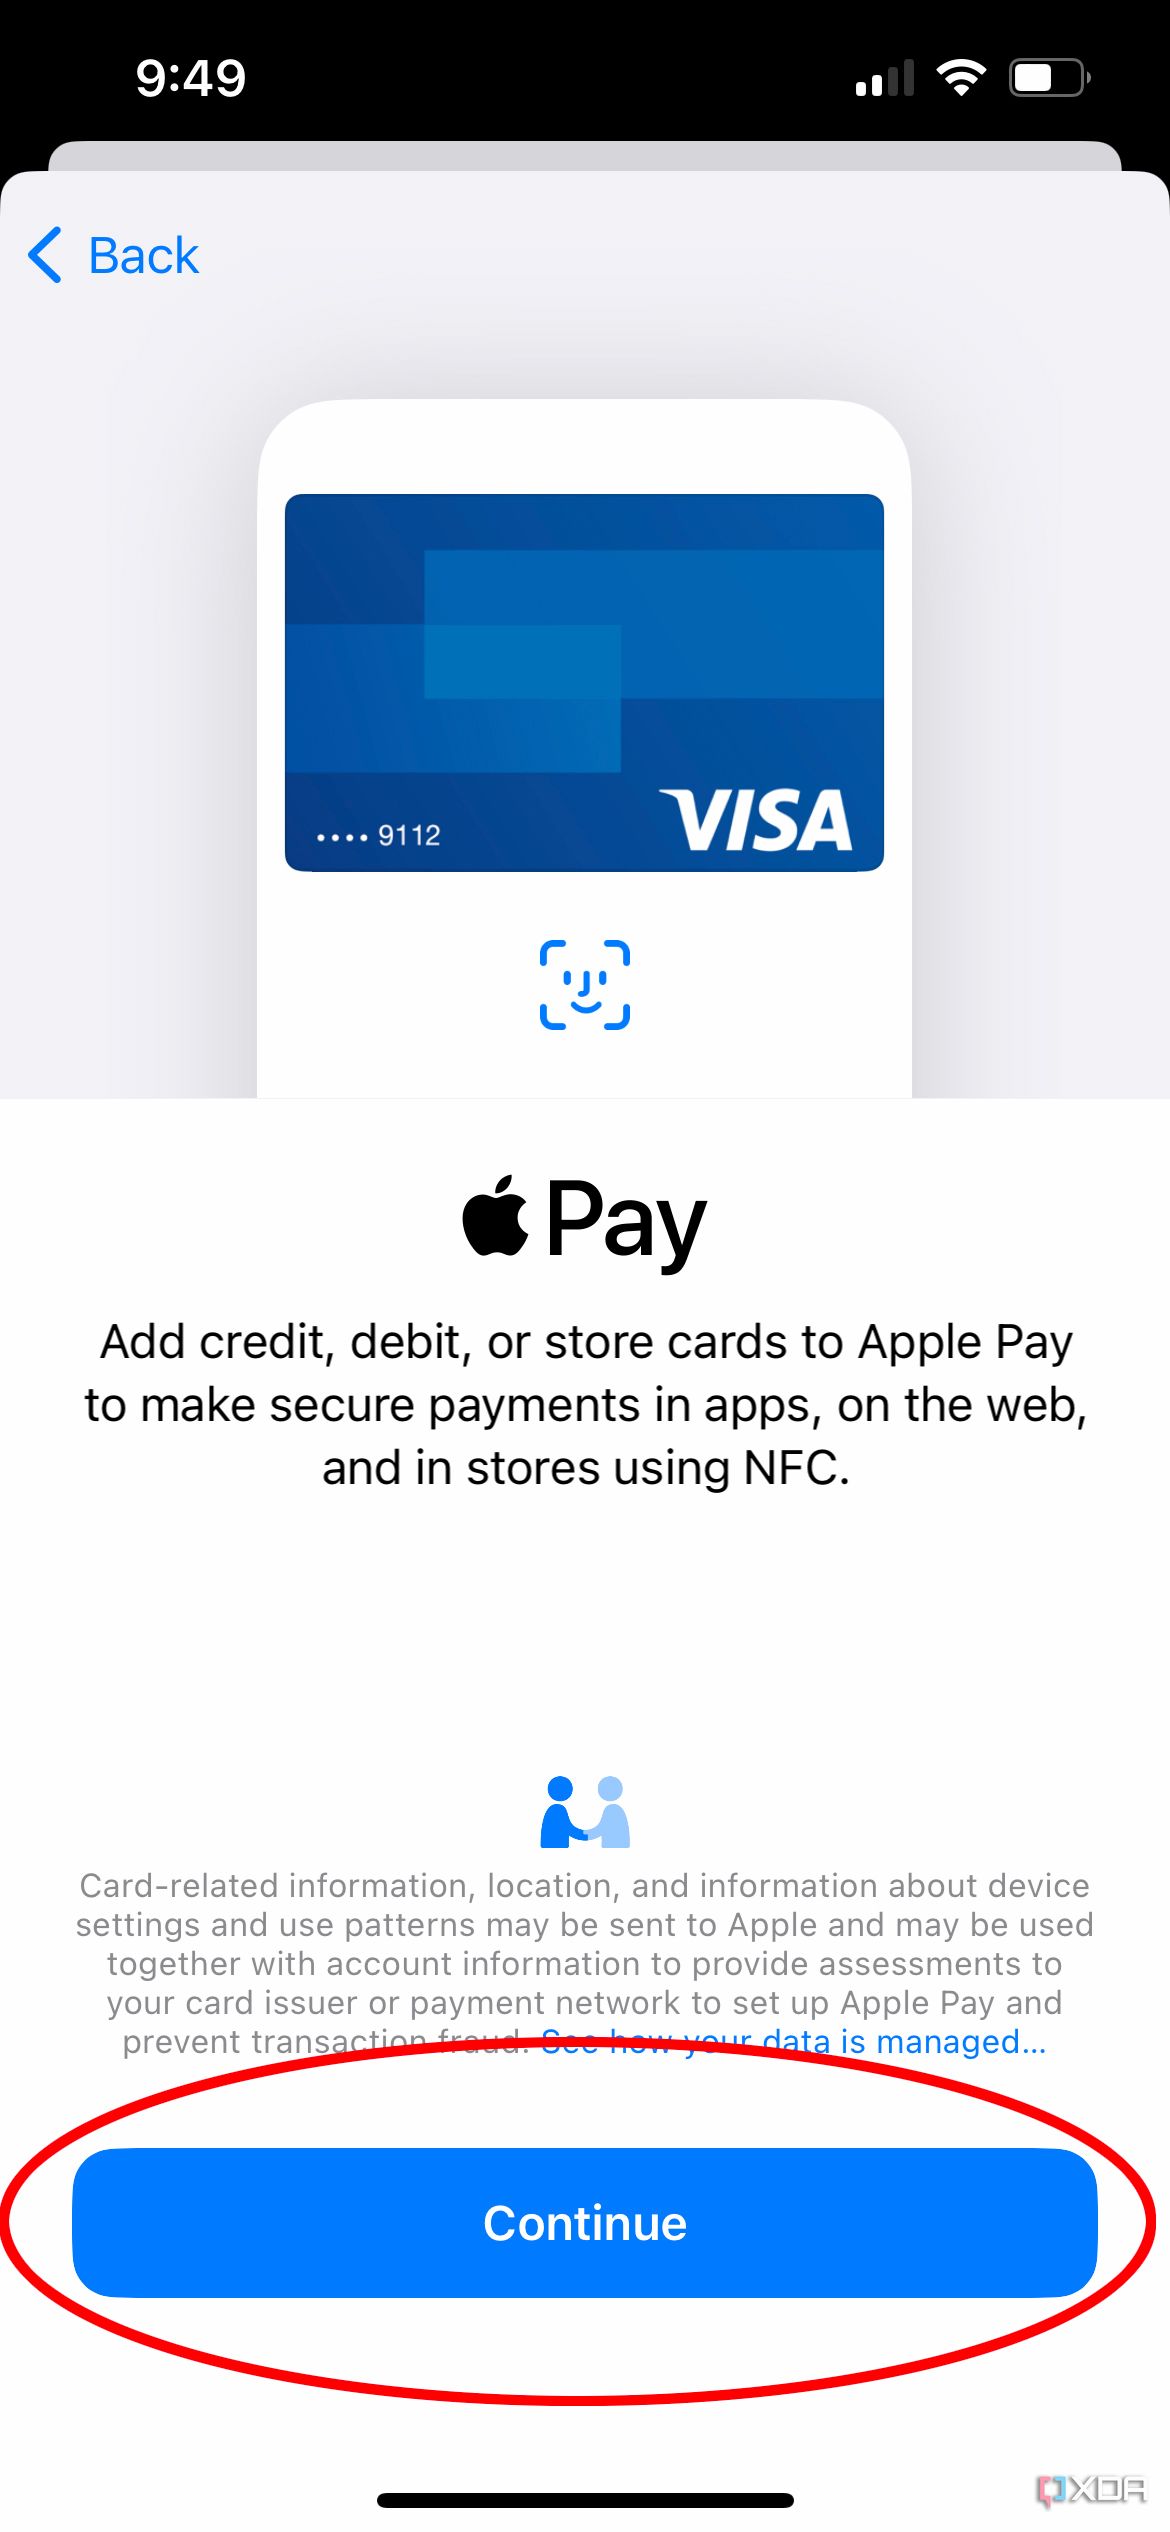 Apple Pay screen on Apple iPhone showing continue.